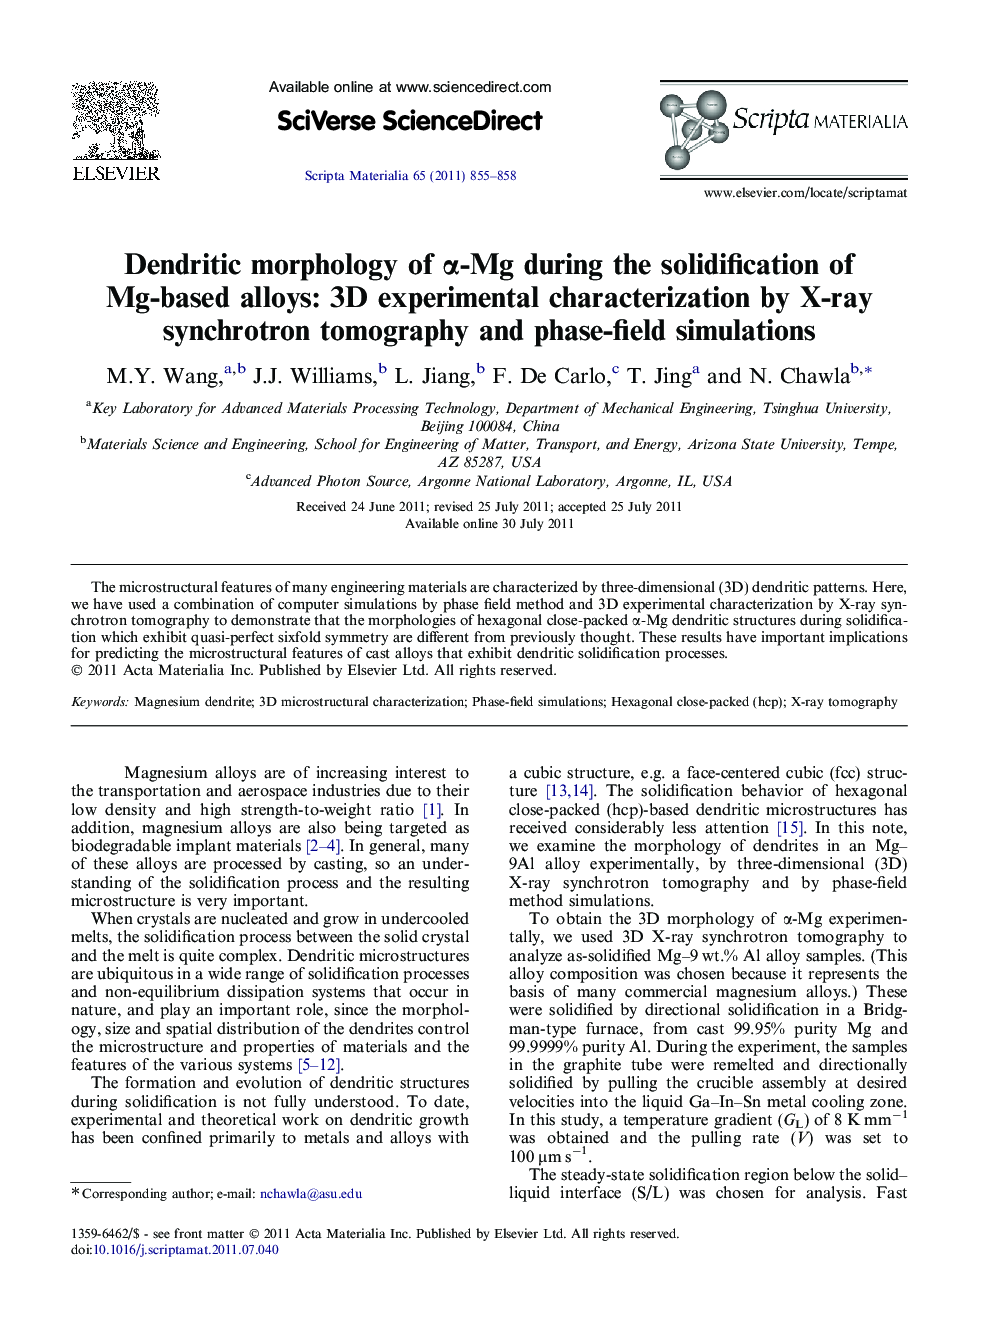 Dendritic morphology of α-Mg during the solidification of Mg-based alloys: 3D experimental characterization by X-ray synchrotron tomography and phase-field simulations